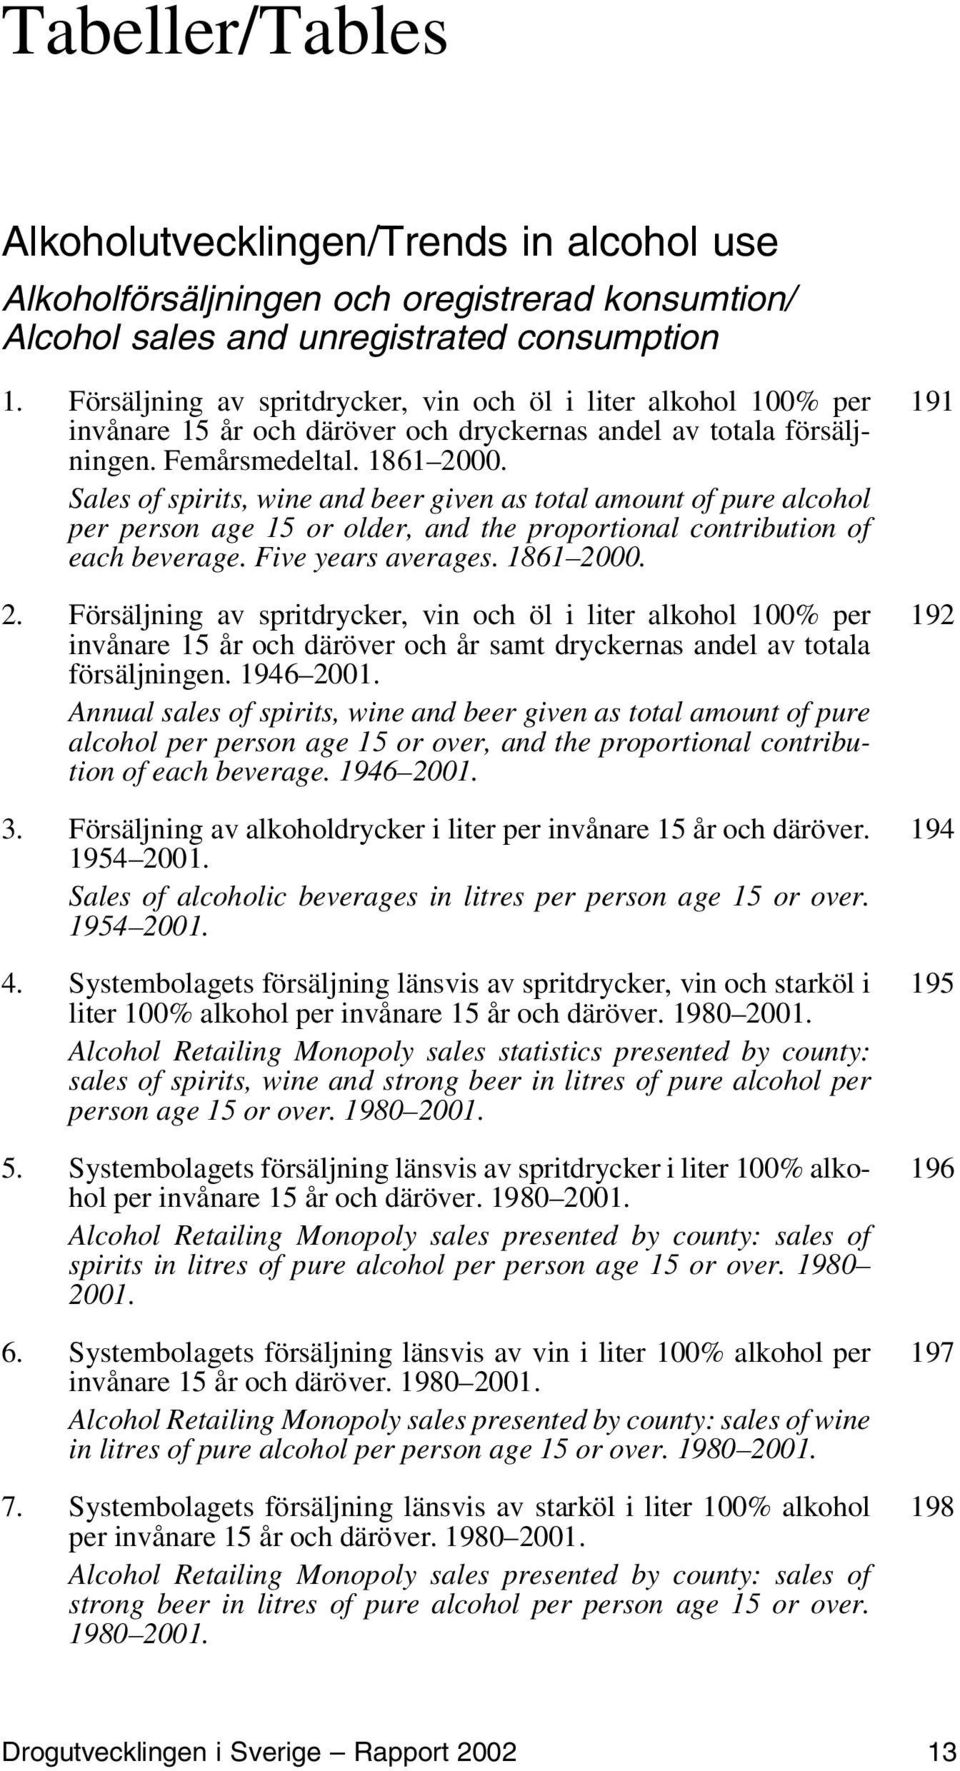 Sales of spirits, wine and beer given as total amount of pure alcohol per person age 15 or older, and the proportional contribution of each beverage. Five years averages. 1861 20